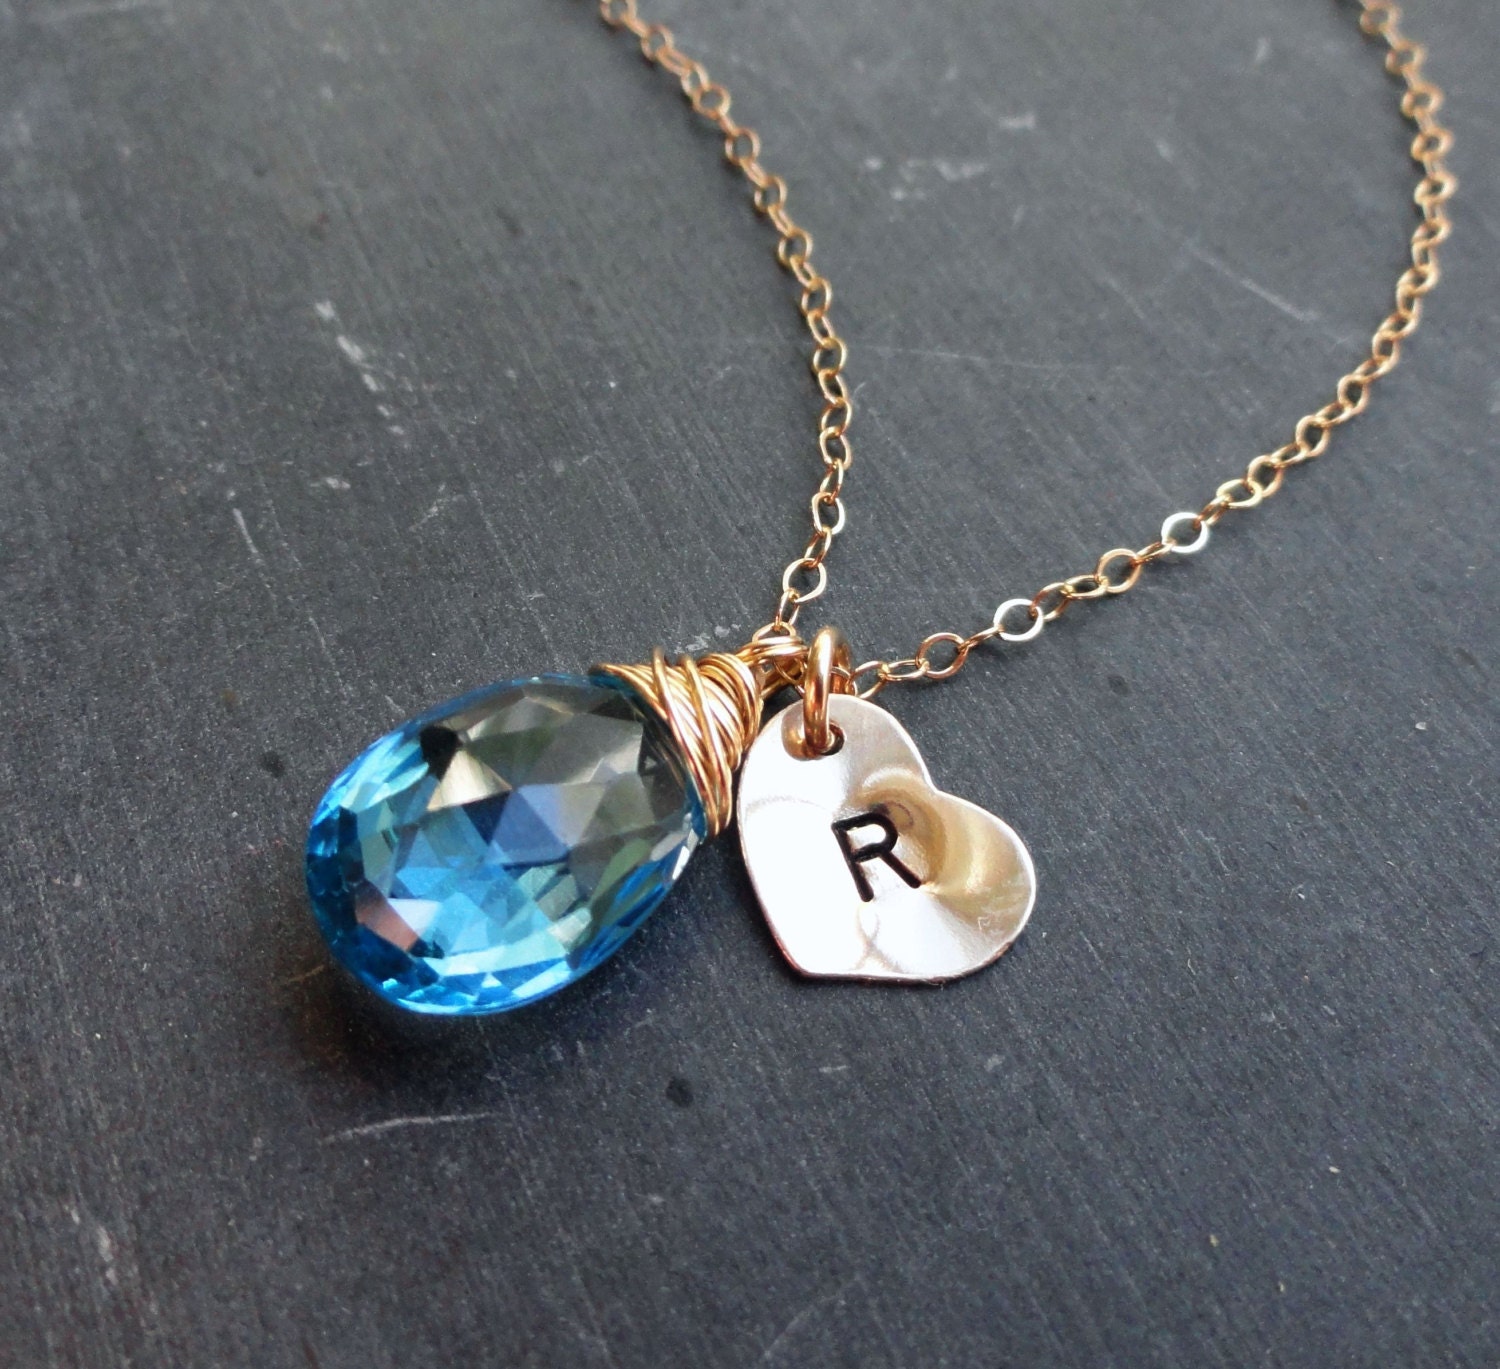 Gold initial necklace with custom birthstone, personalized gemstone necklace, birthstone necklace with letter charm, otis b, blue topaz